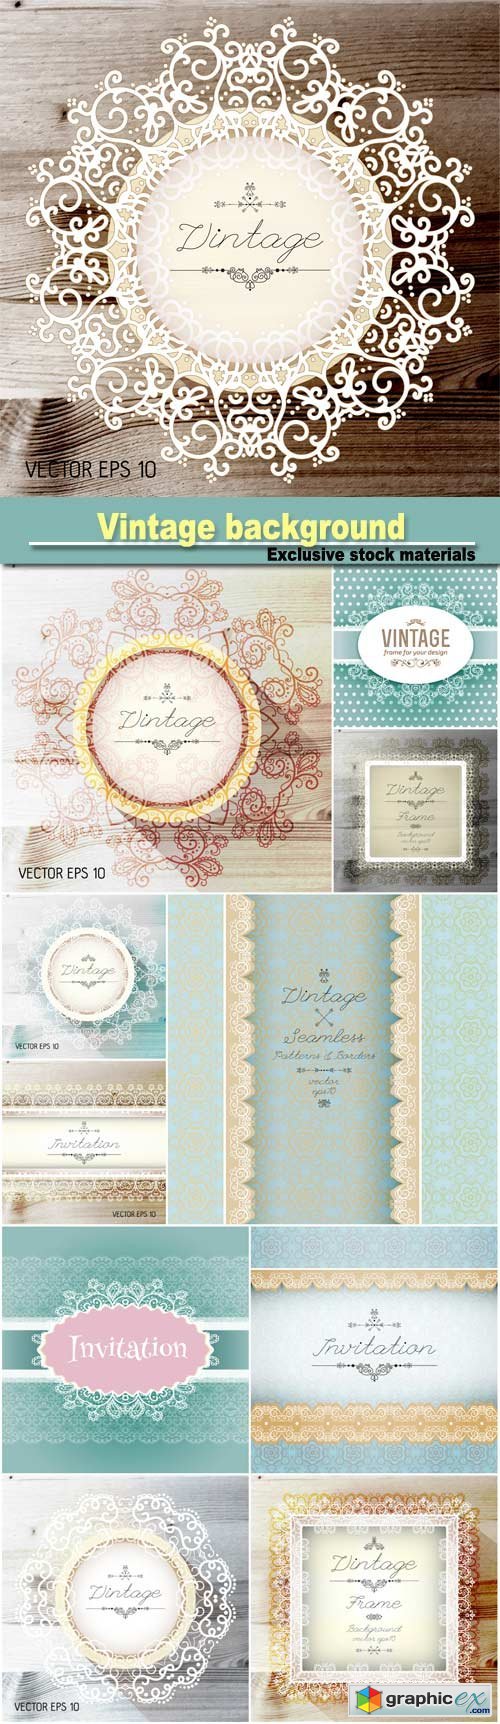 Vintage seamless background and border, invitation with lace, vector